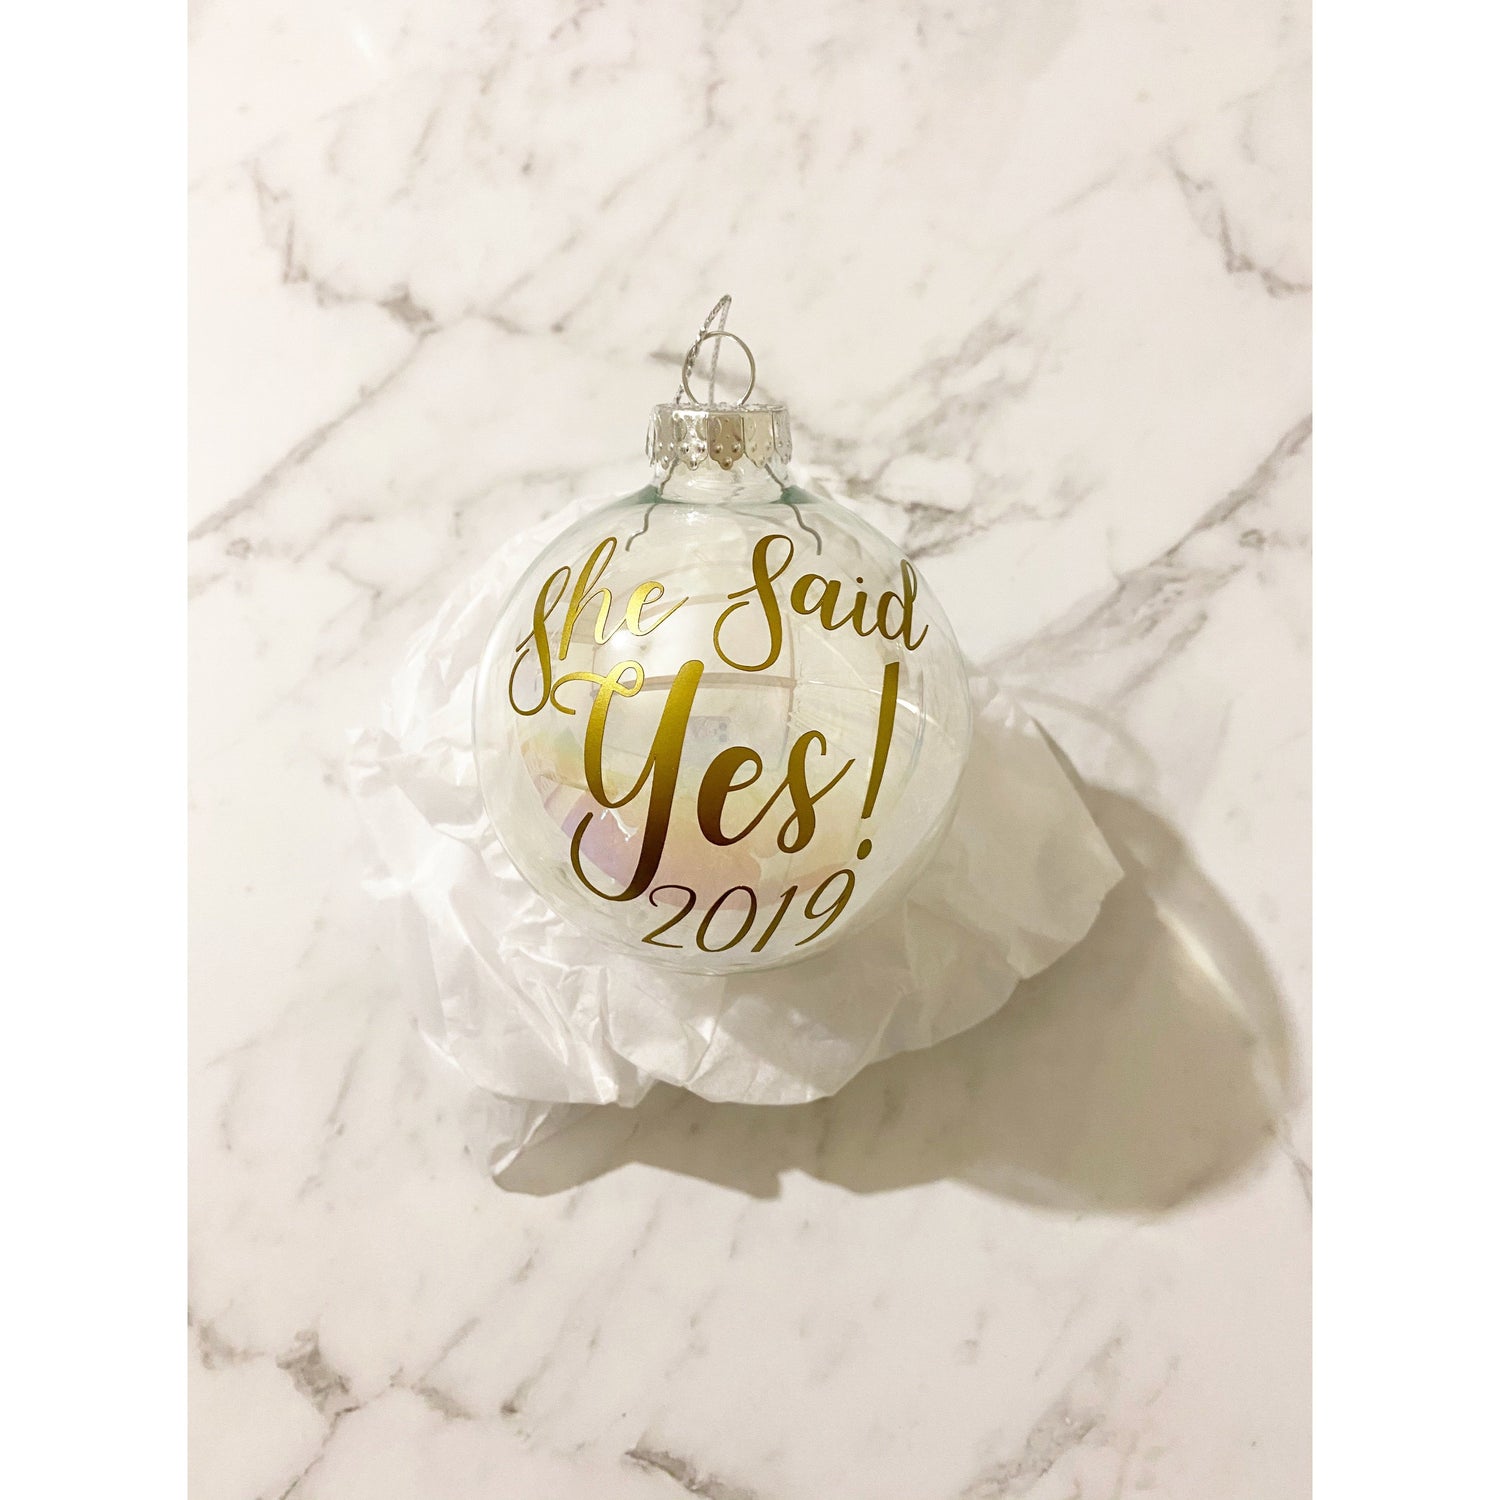 Personalised Baubles-Infinity Beauty & Designs